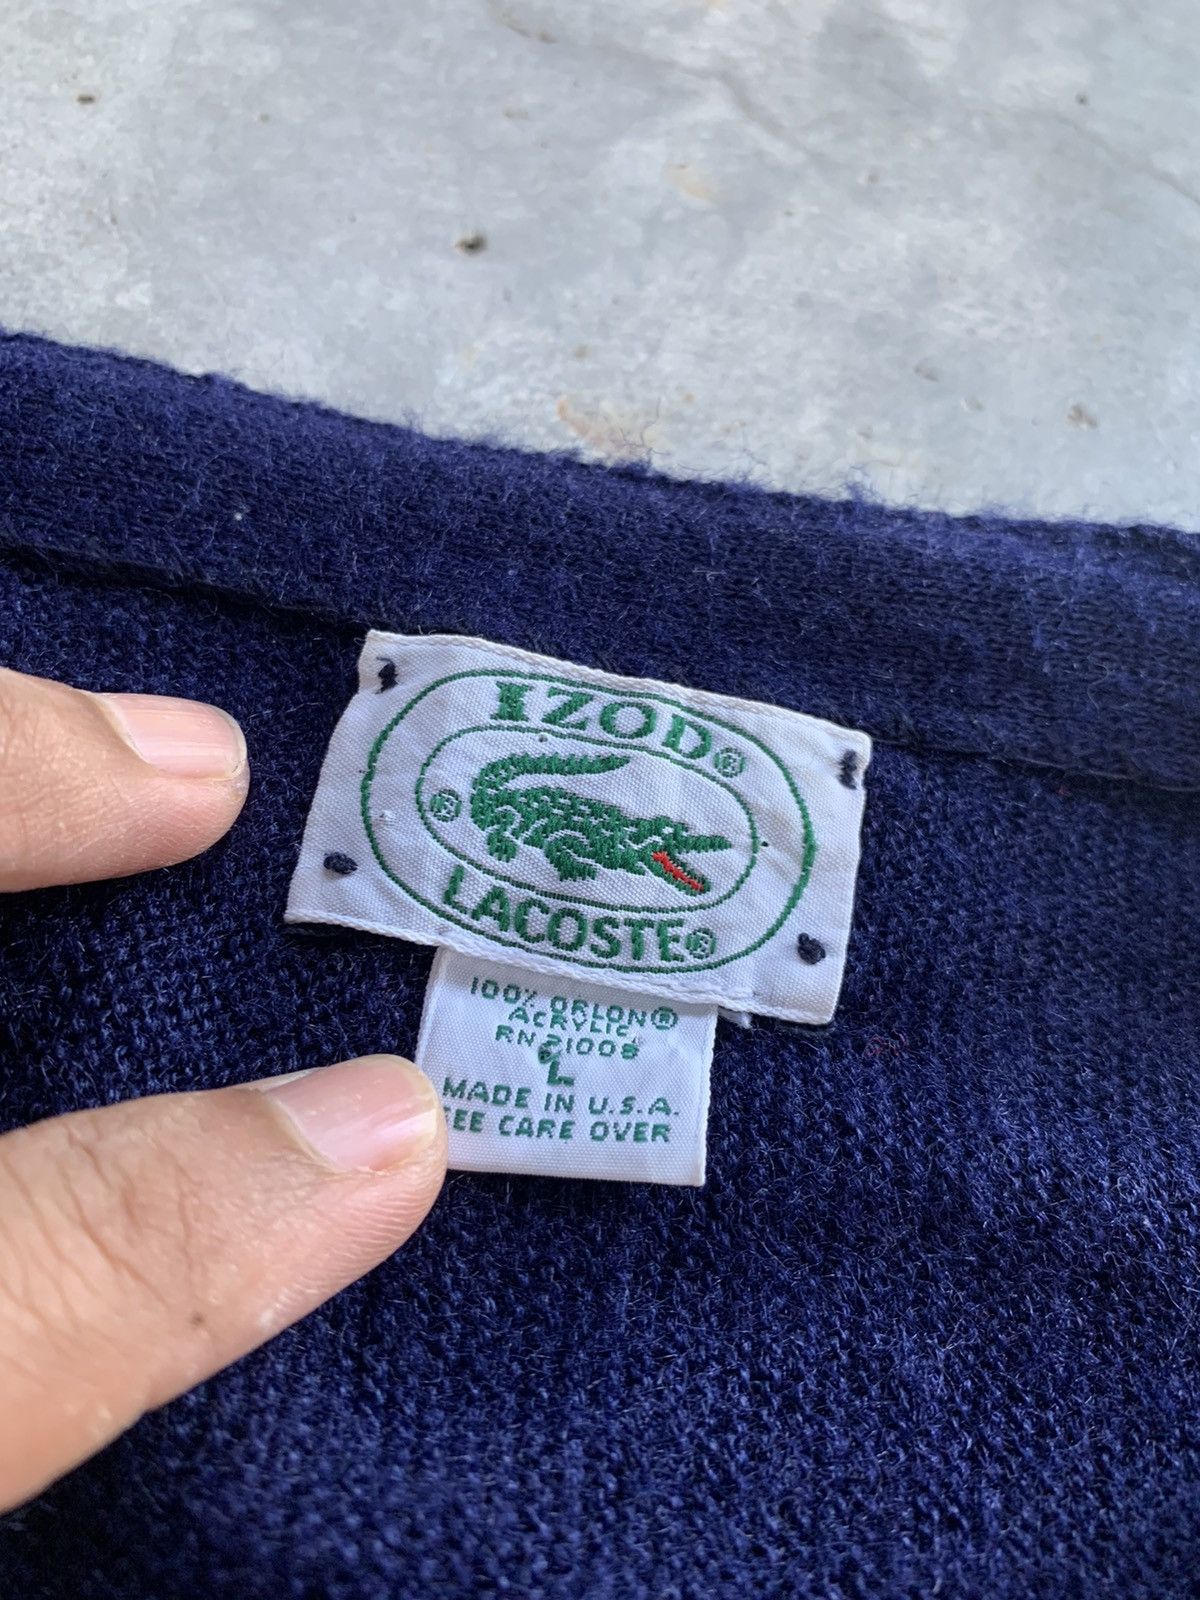 Vintage Lacoste Made In Usa Wool Acrylic Cardigan Jacket - 5